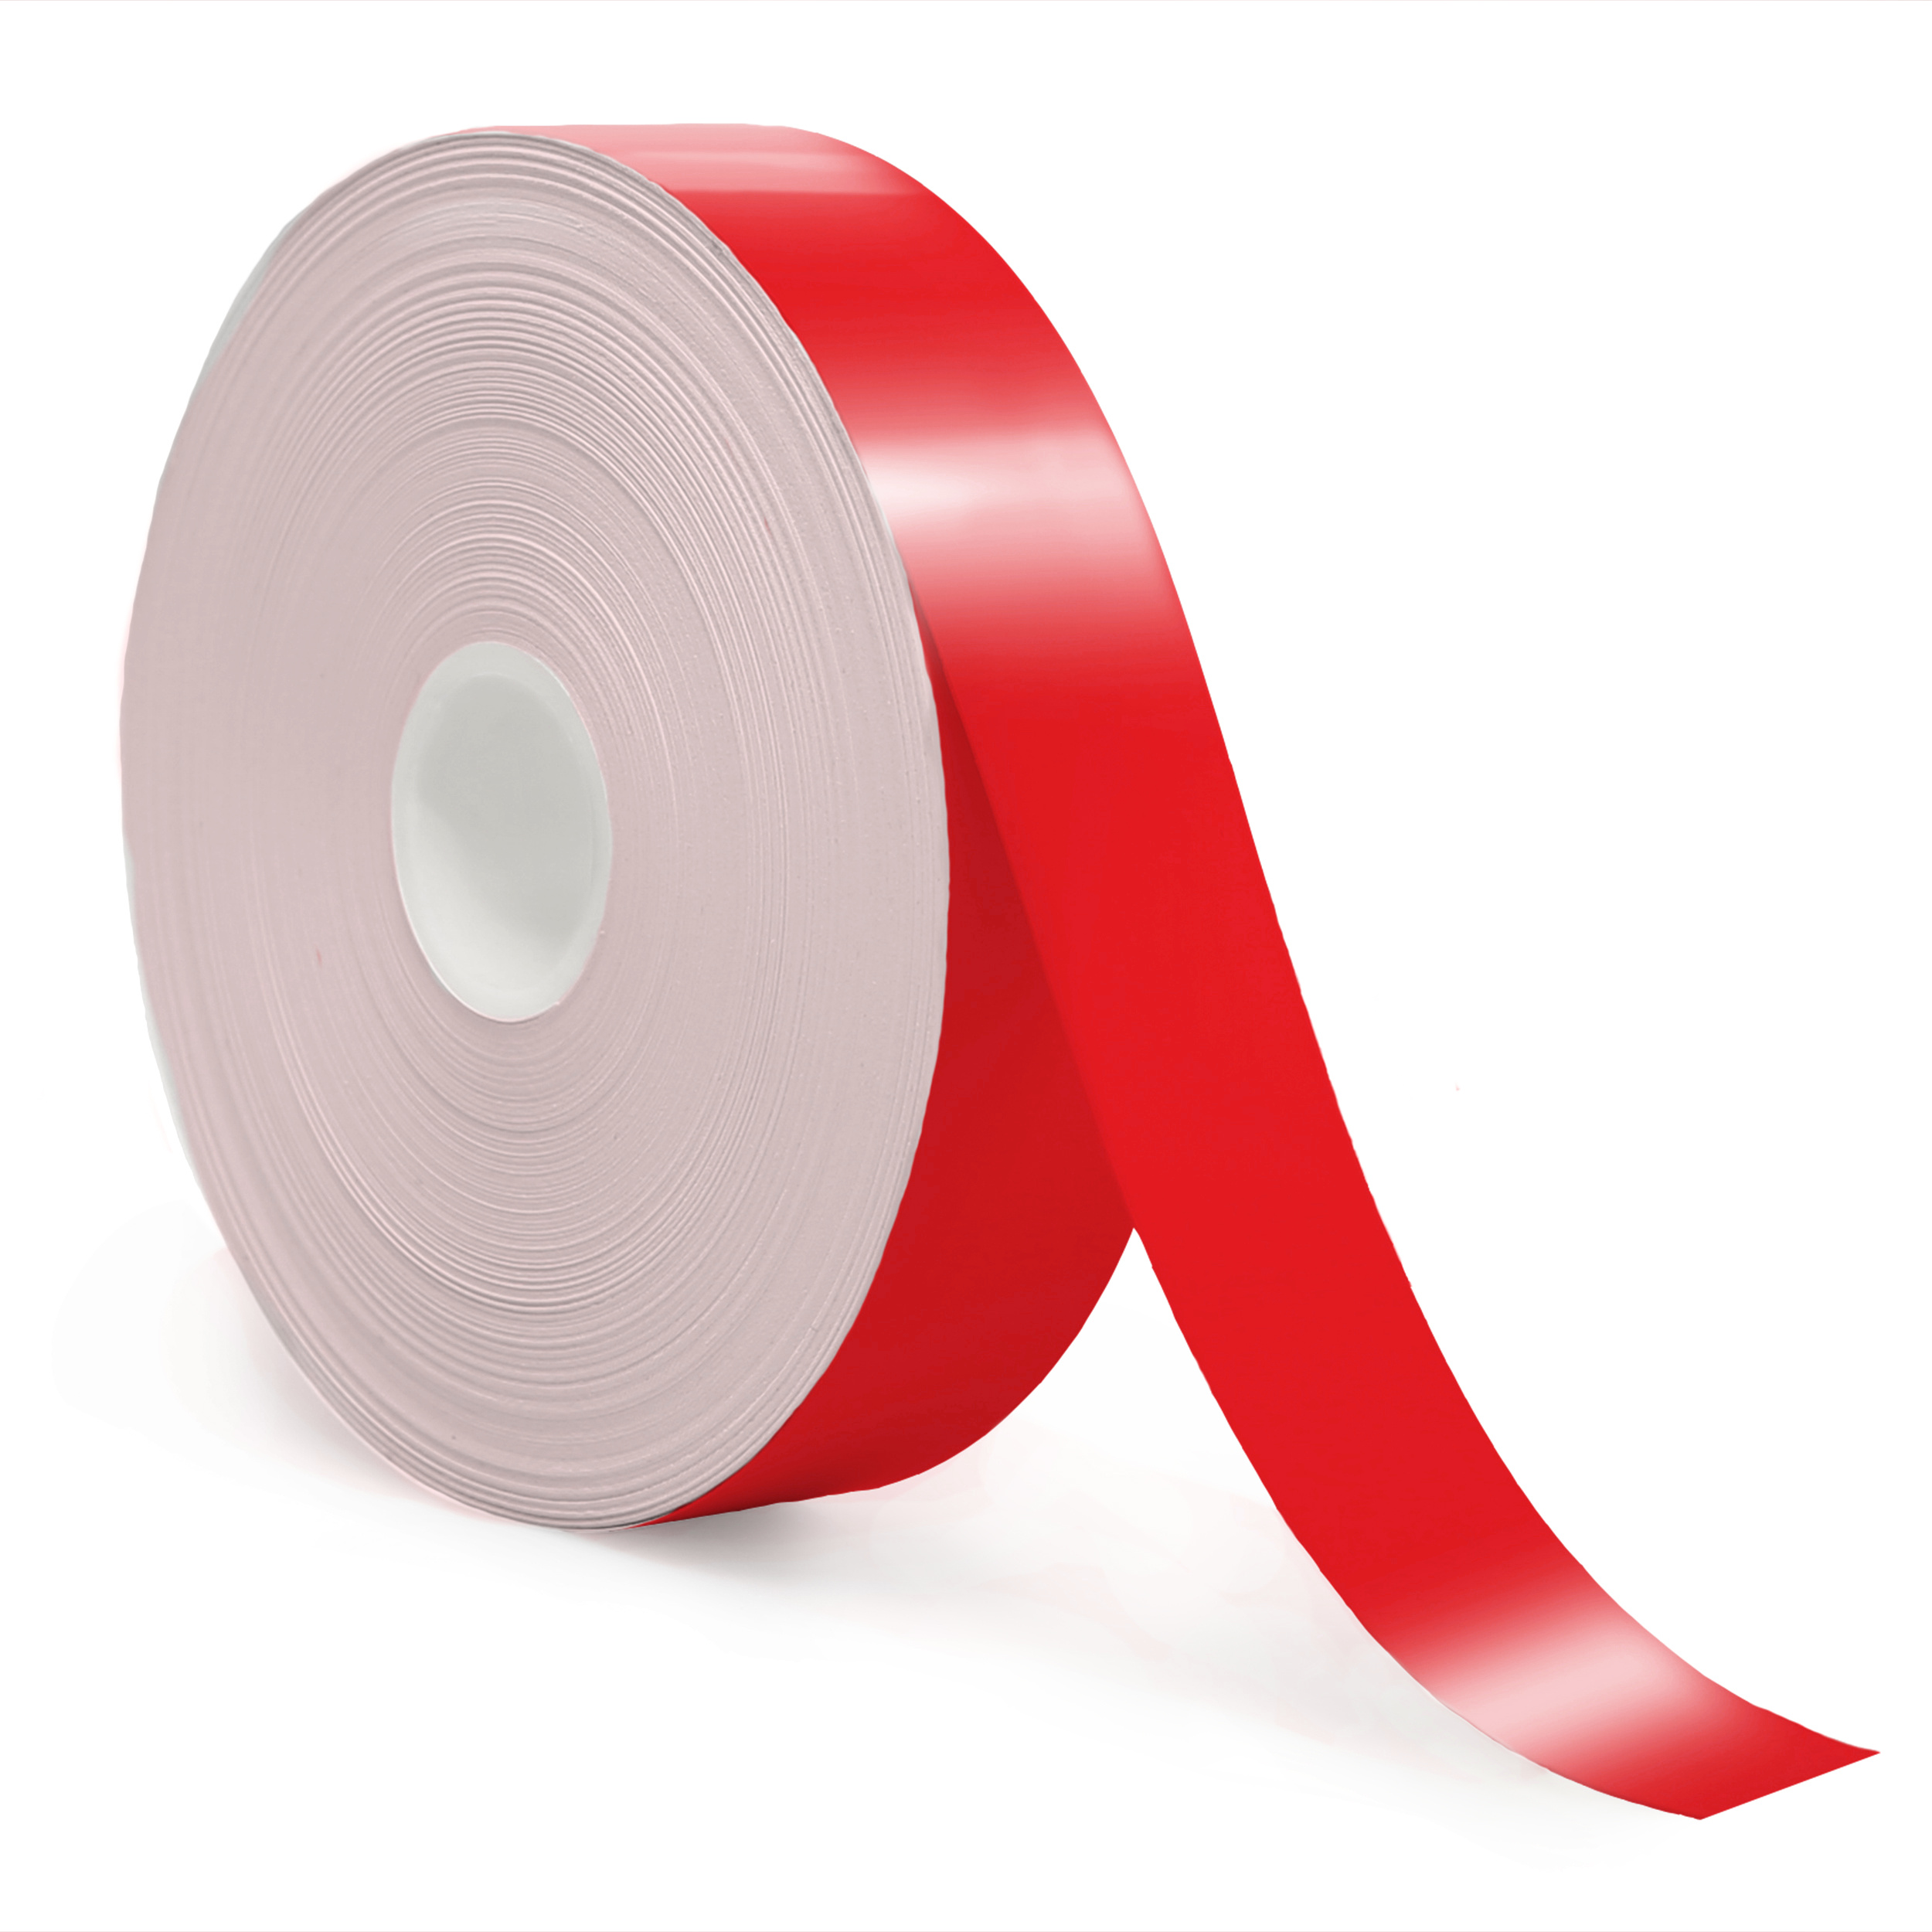 Detail view for 1" x 70ft Red Reflective Vinyl Tape